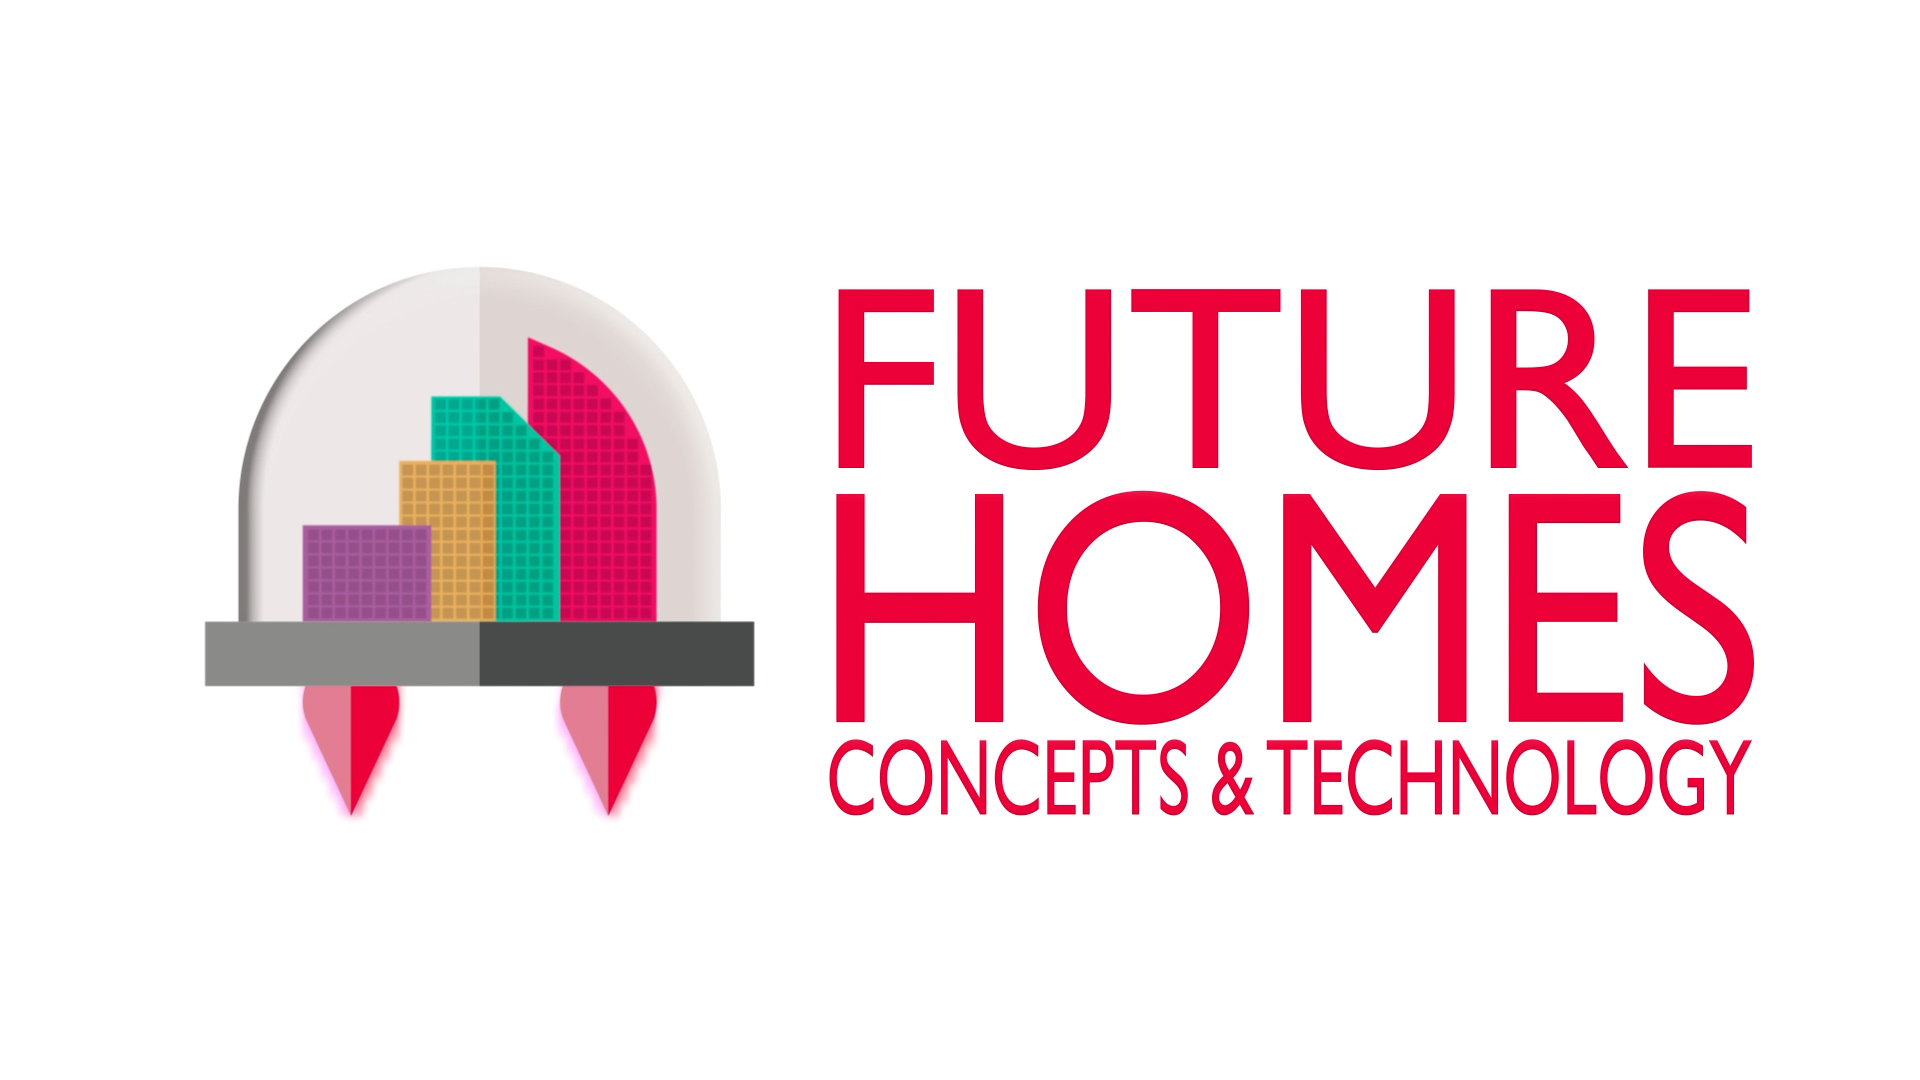 Future Homes - Concepts & Technologies